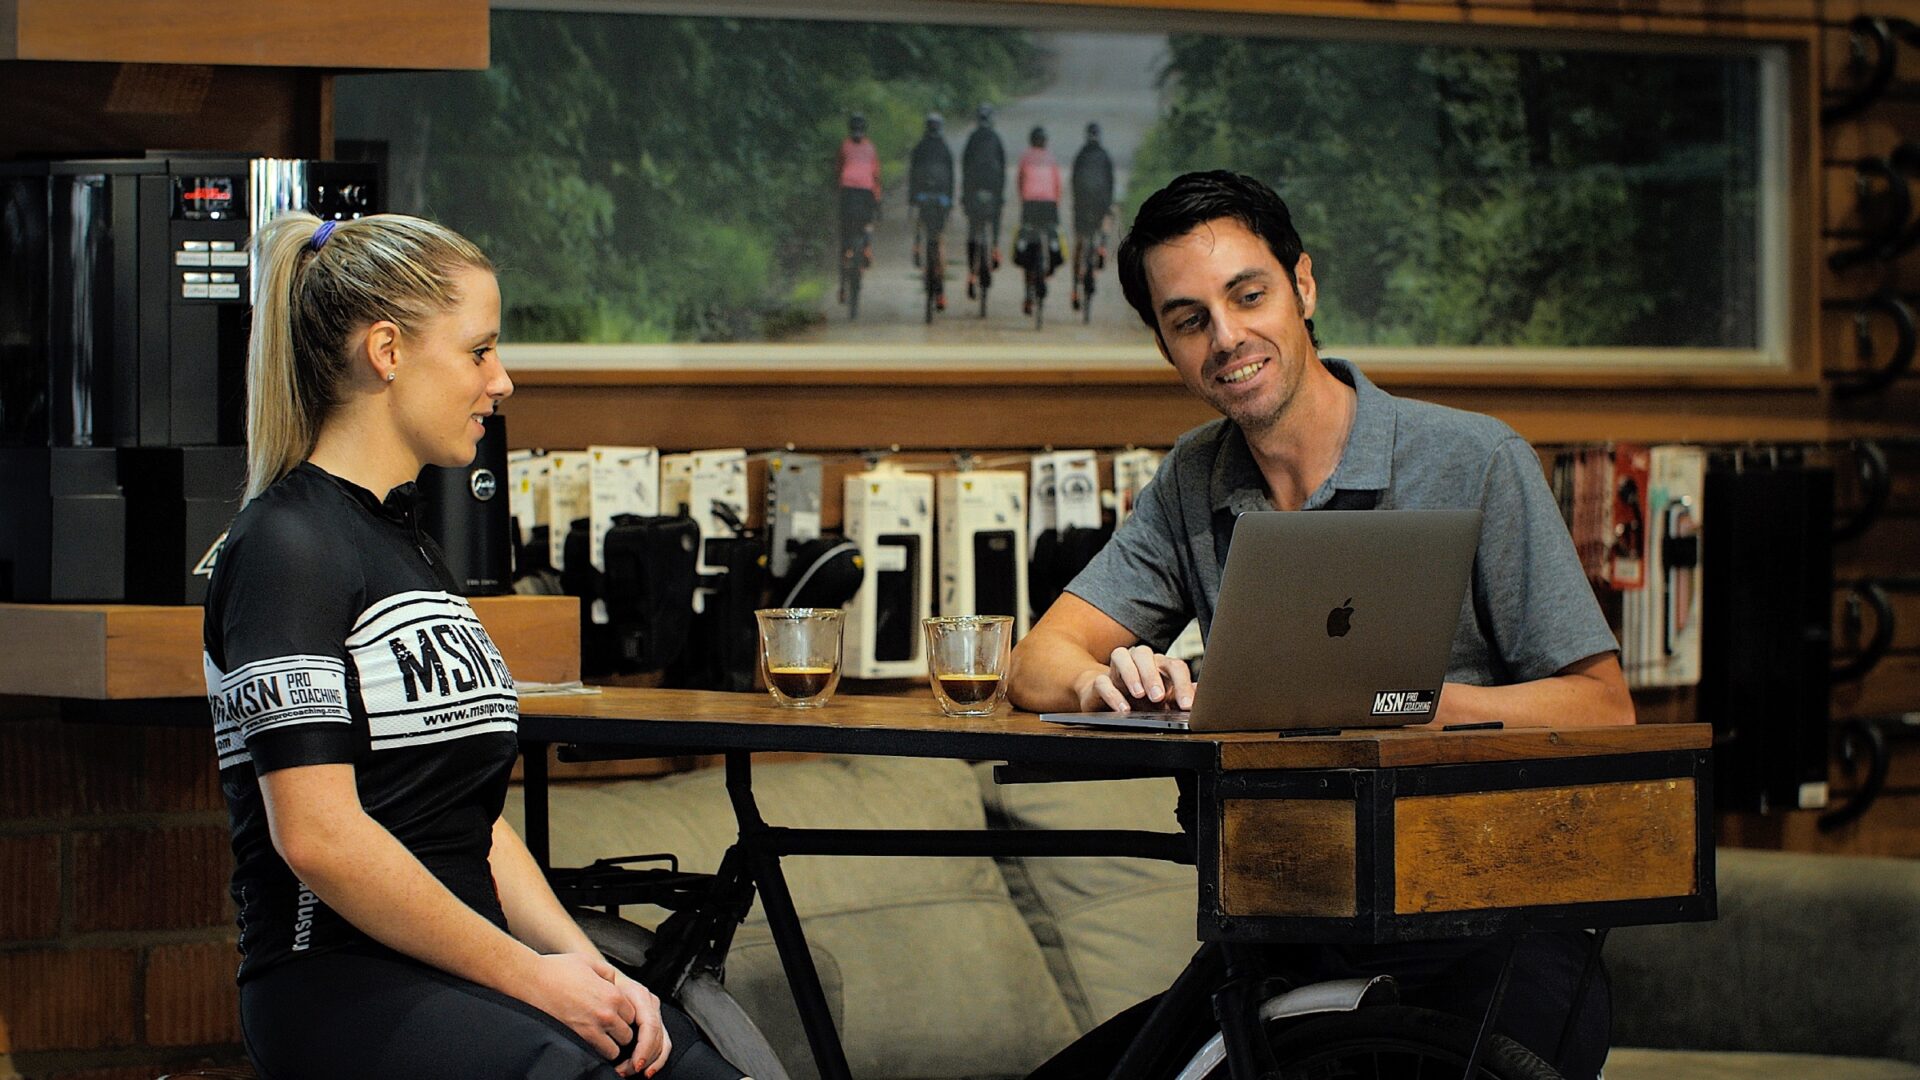 Mike Norton sitting at a table with a cyclist, showing her data on a laptop.